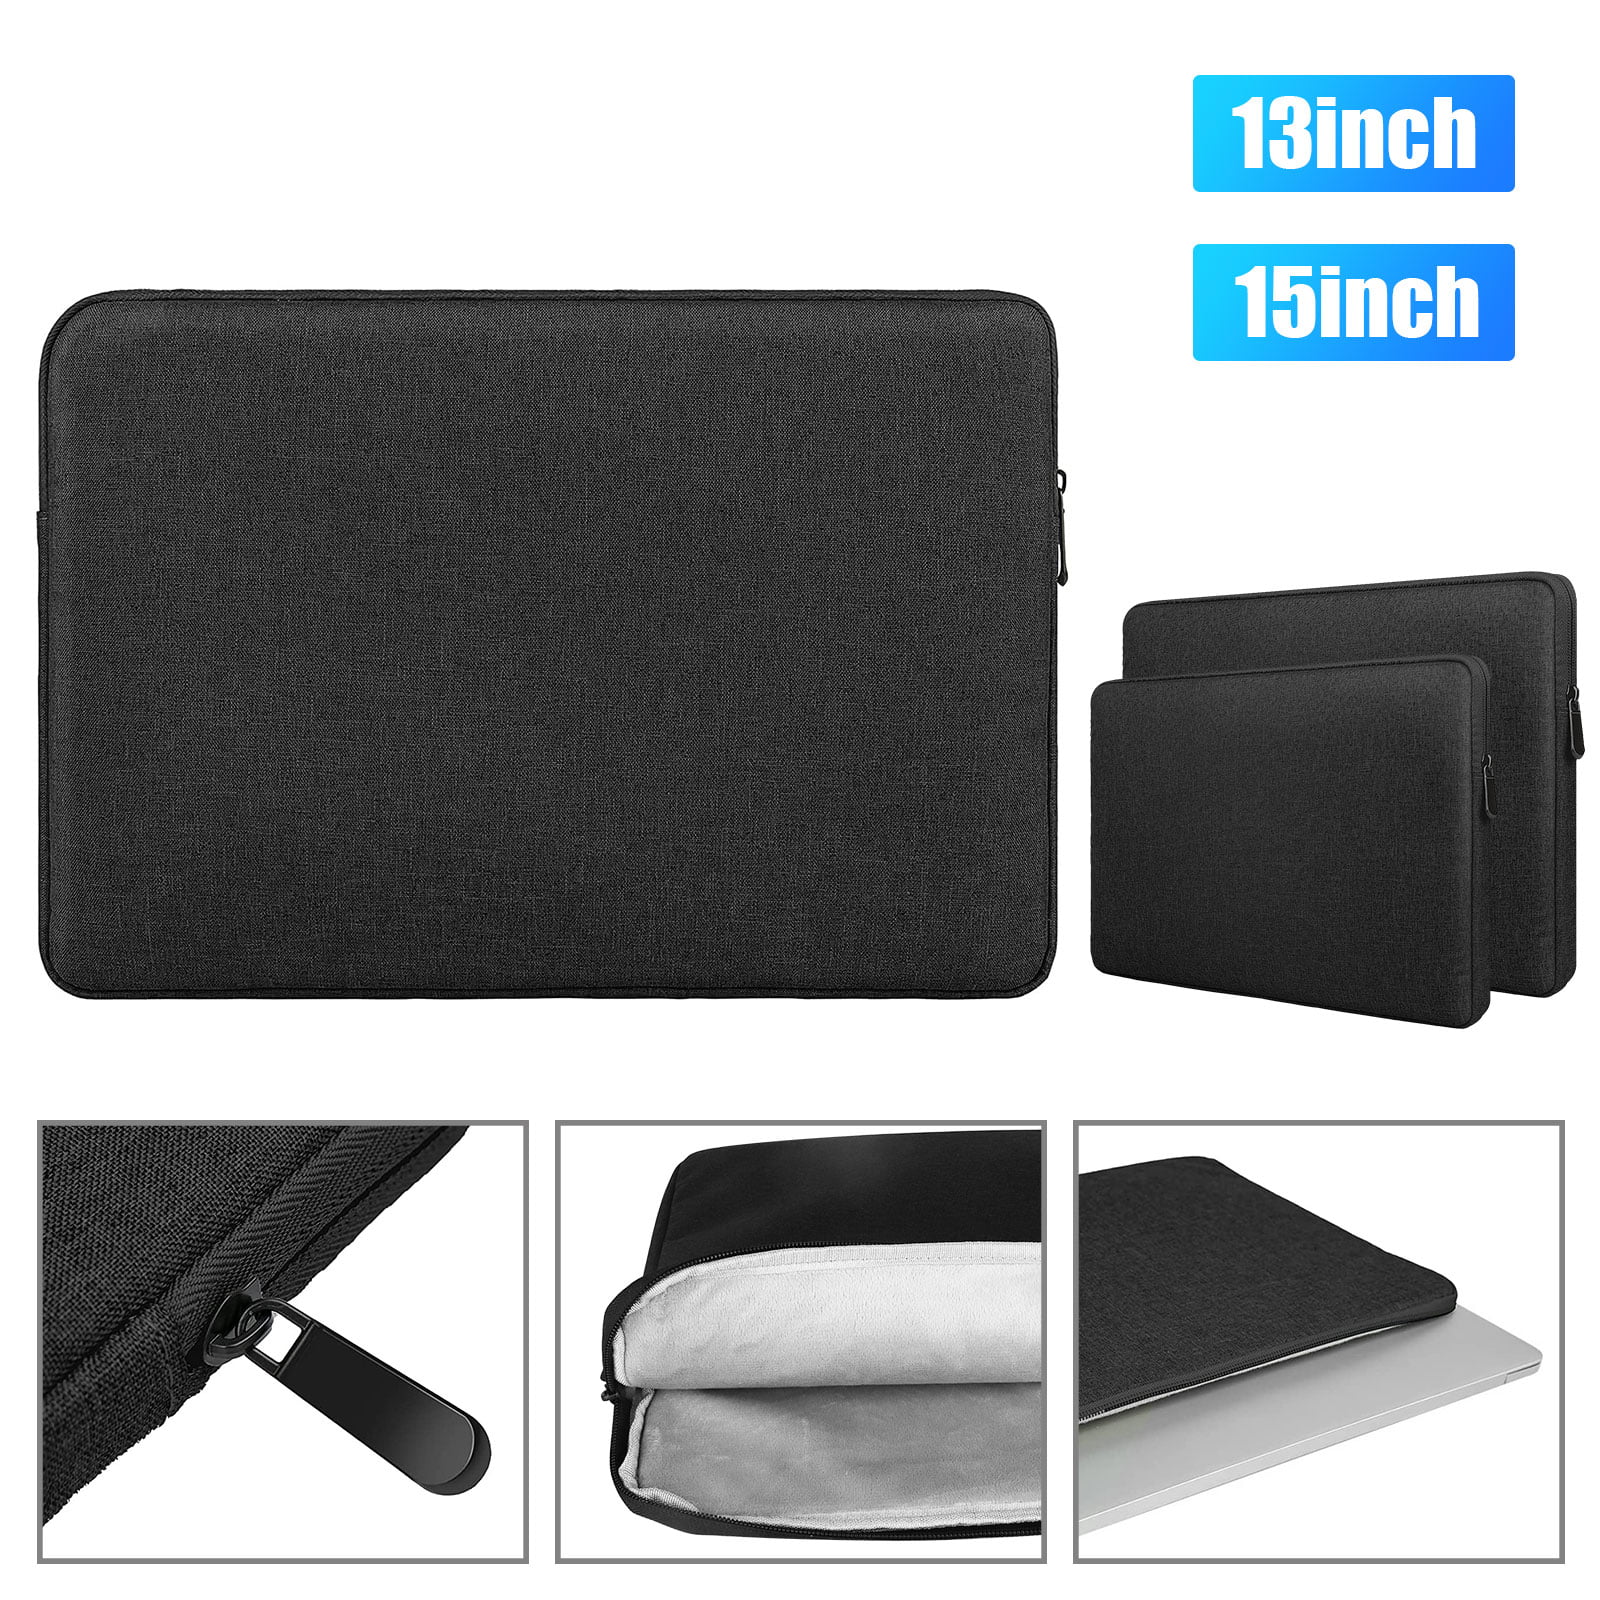 Laptop Case,10-17 Inch Laptop Sleeve Carrying Case Polyester Sleeve for Acer/Asus/Dell/Lenovo/MacBook Pro/HP/Samsung/Sony/Toshiba,Cat Paw Dog Paw 12 inch 